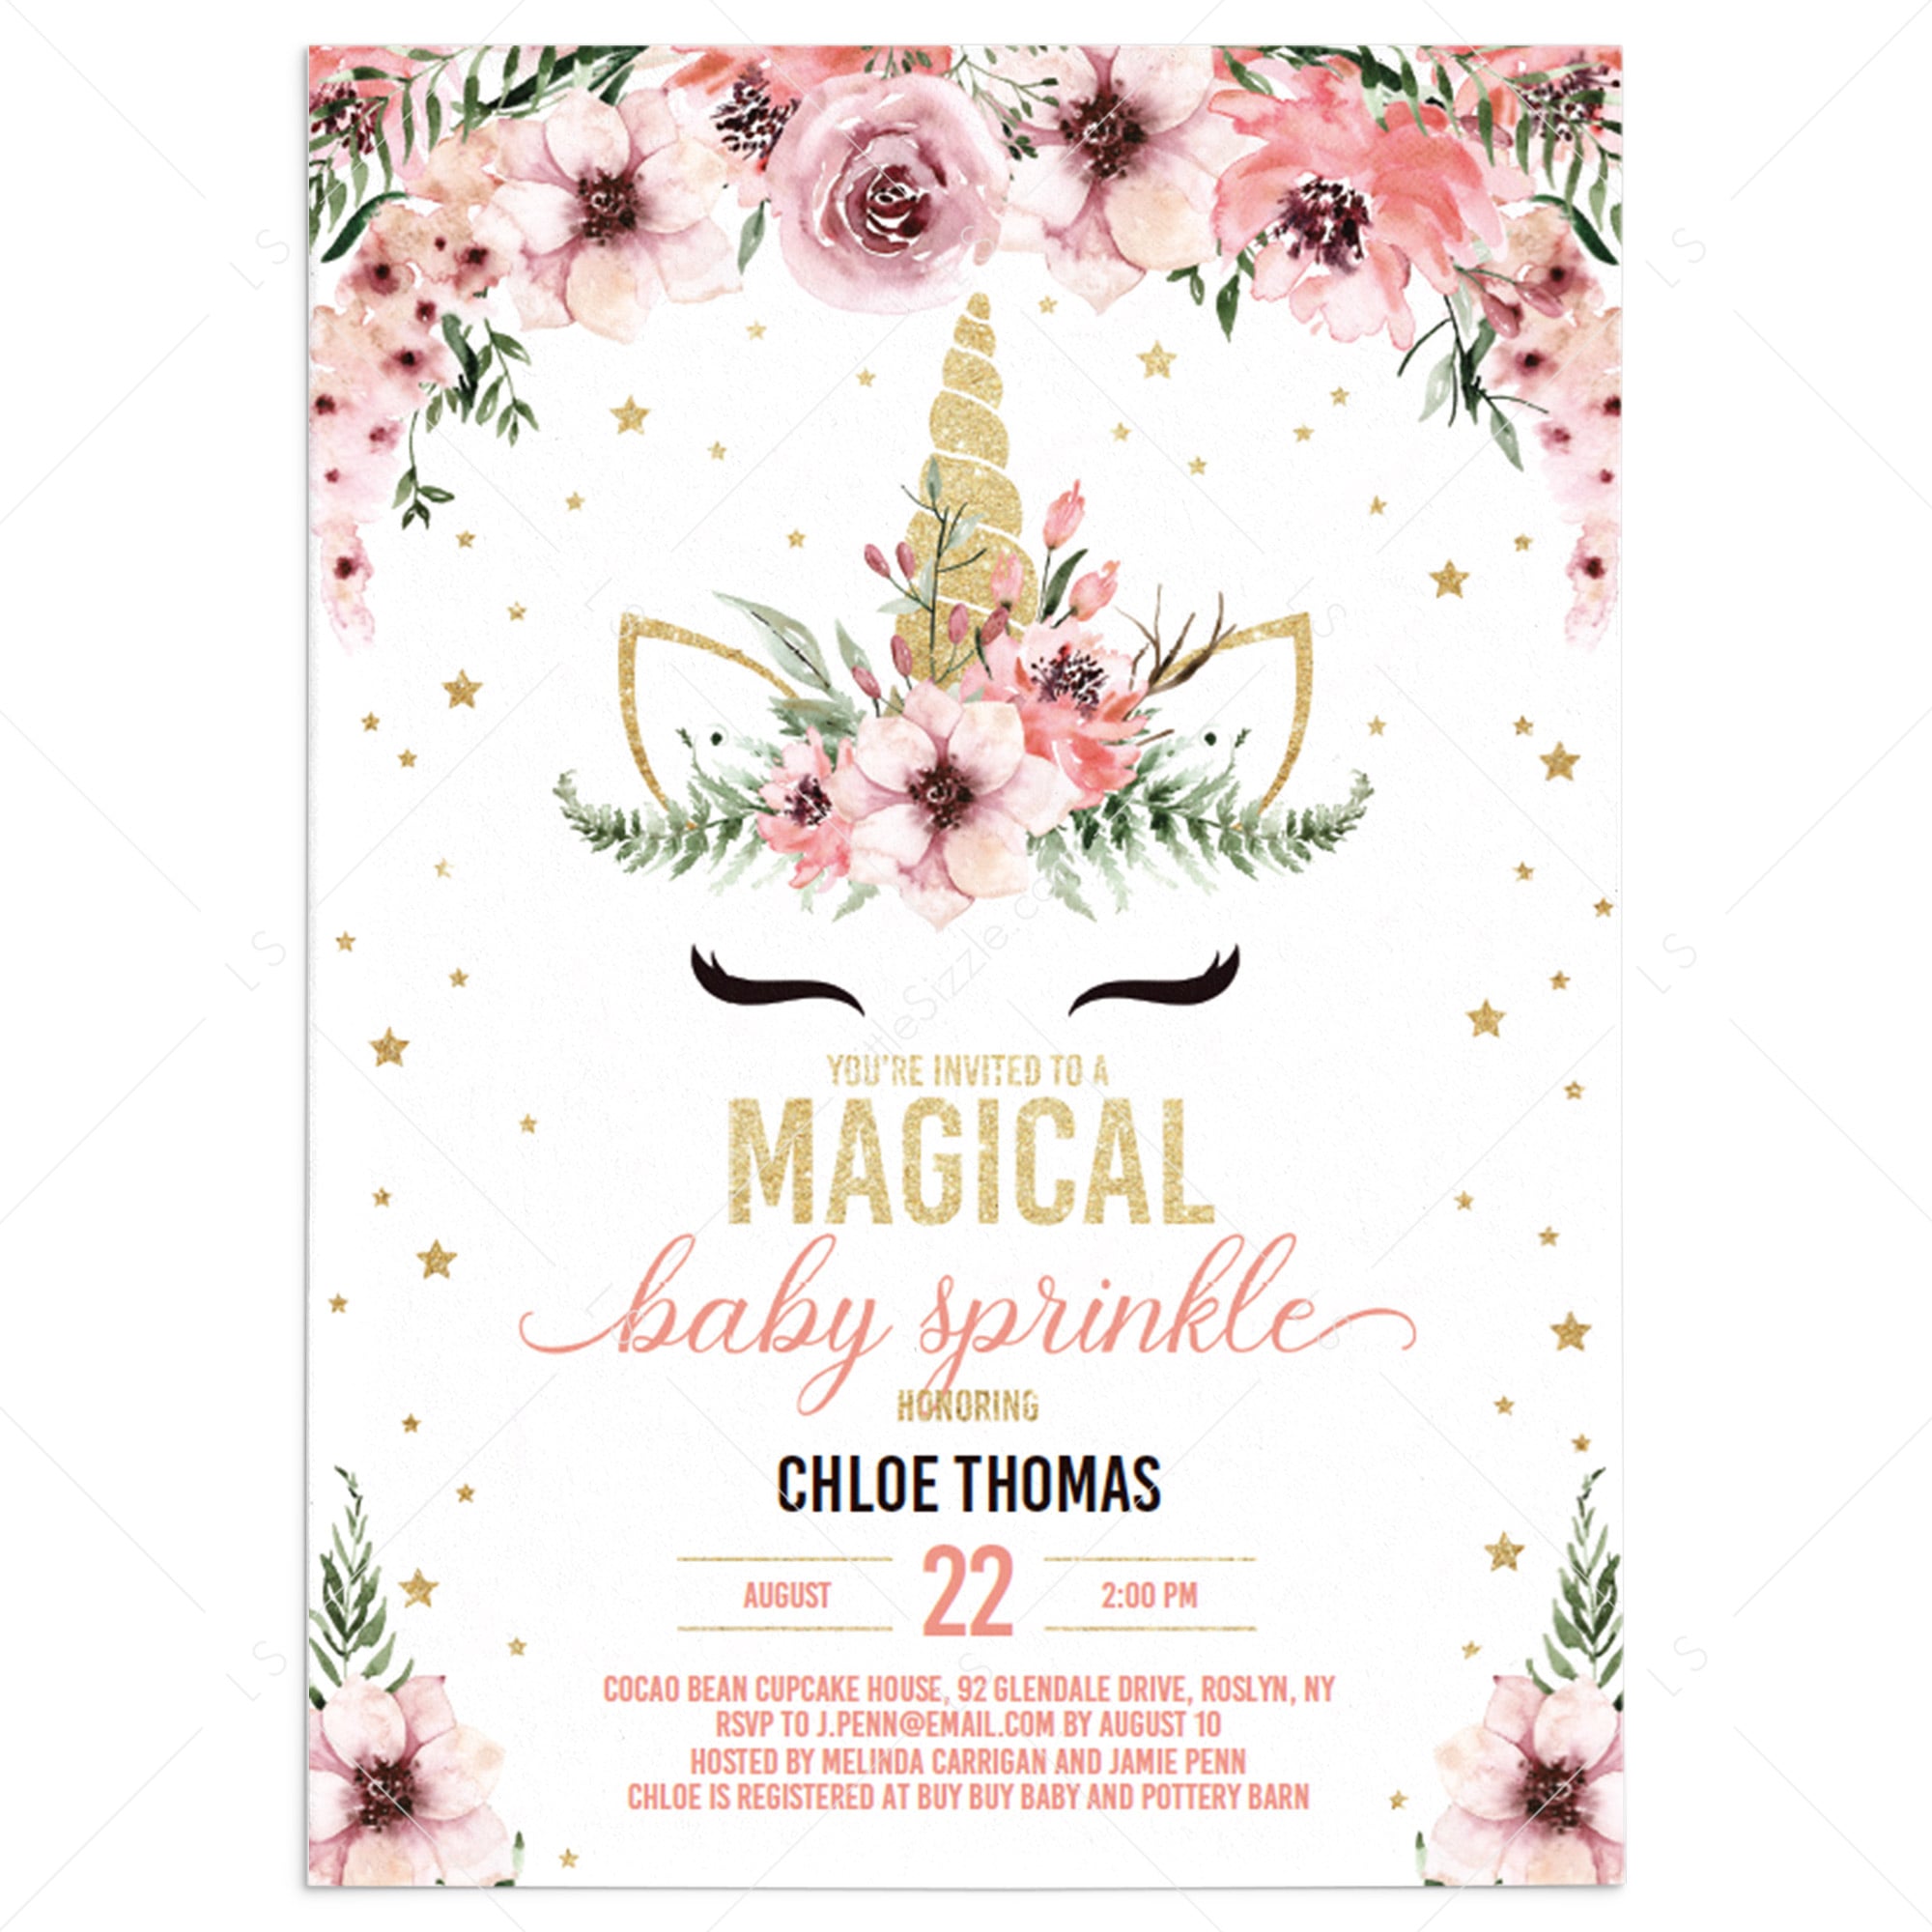 Unicorn baby sprinkle invitation template by LittleSizzle